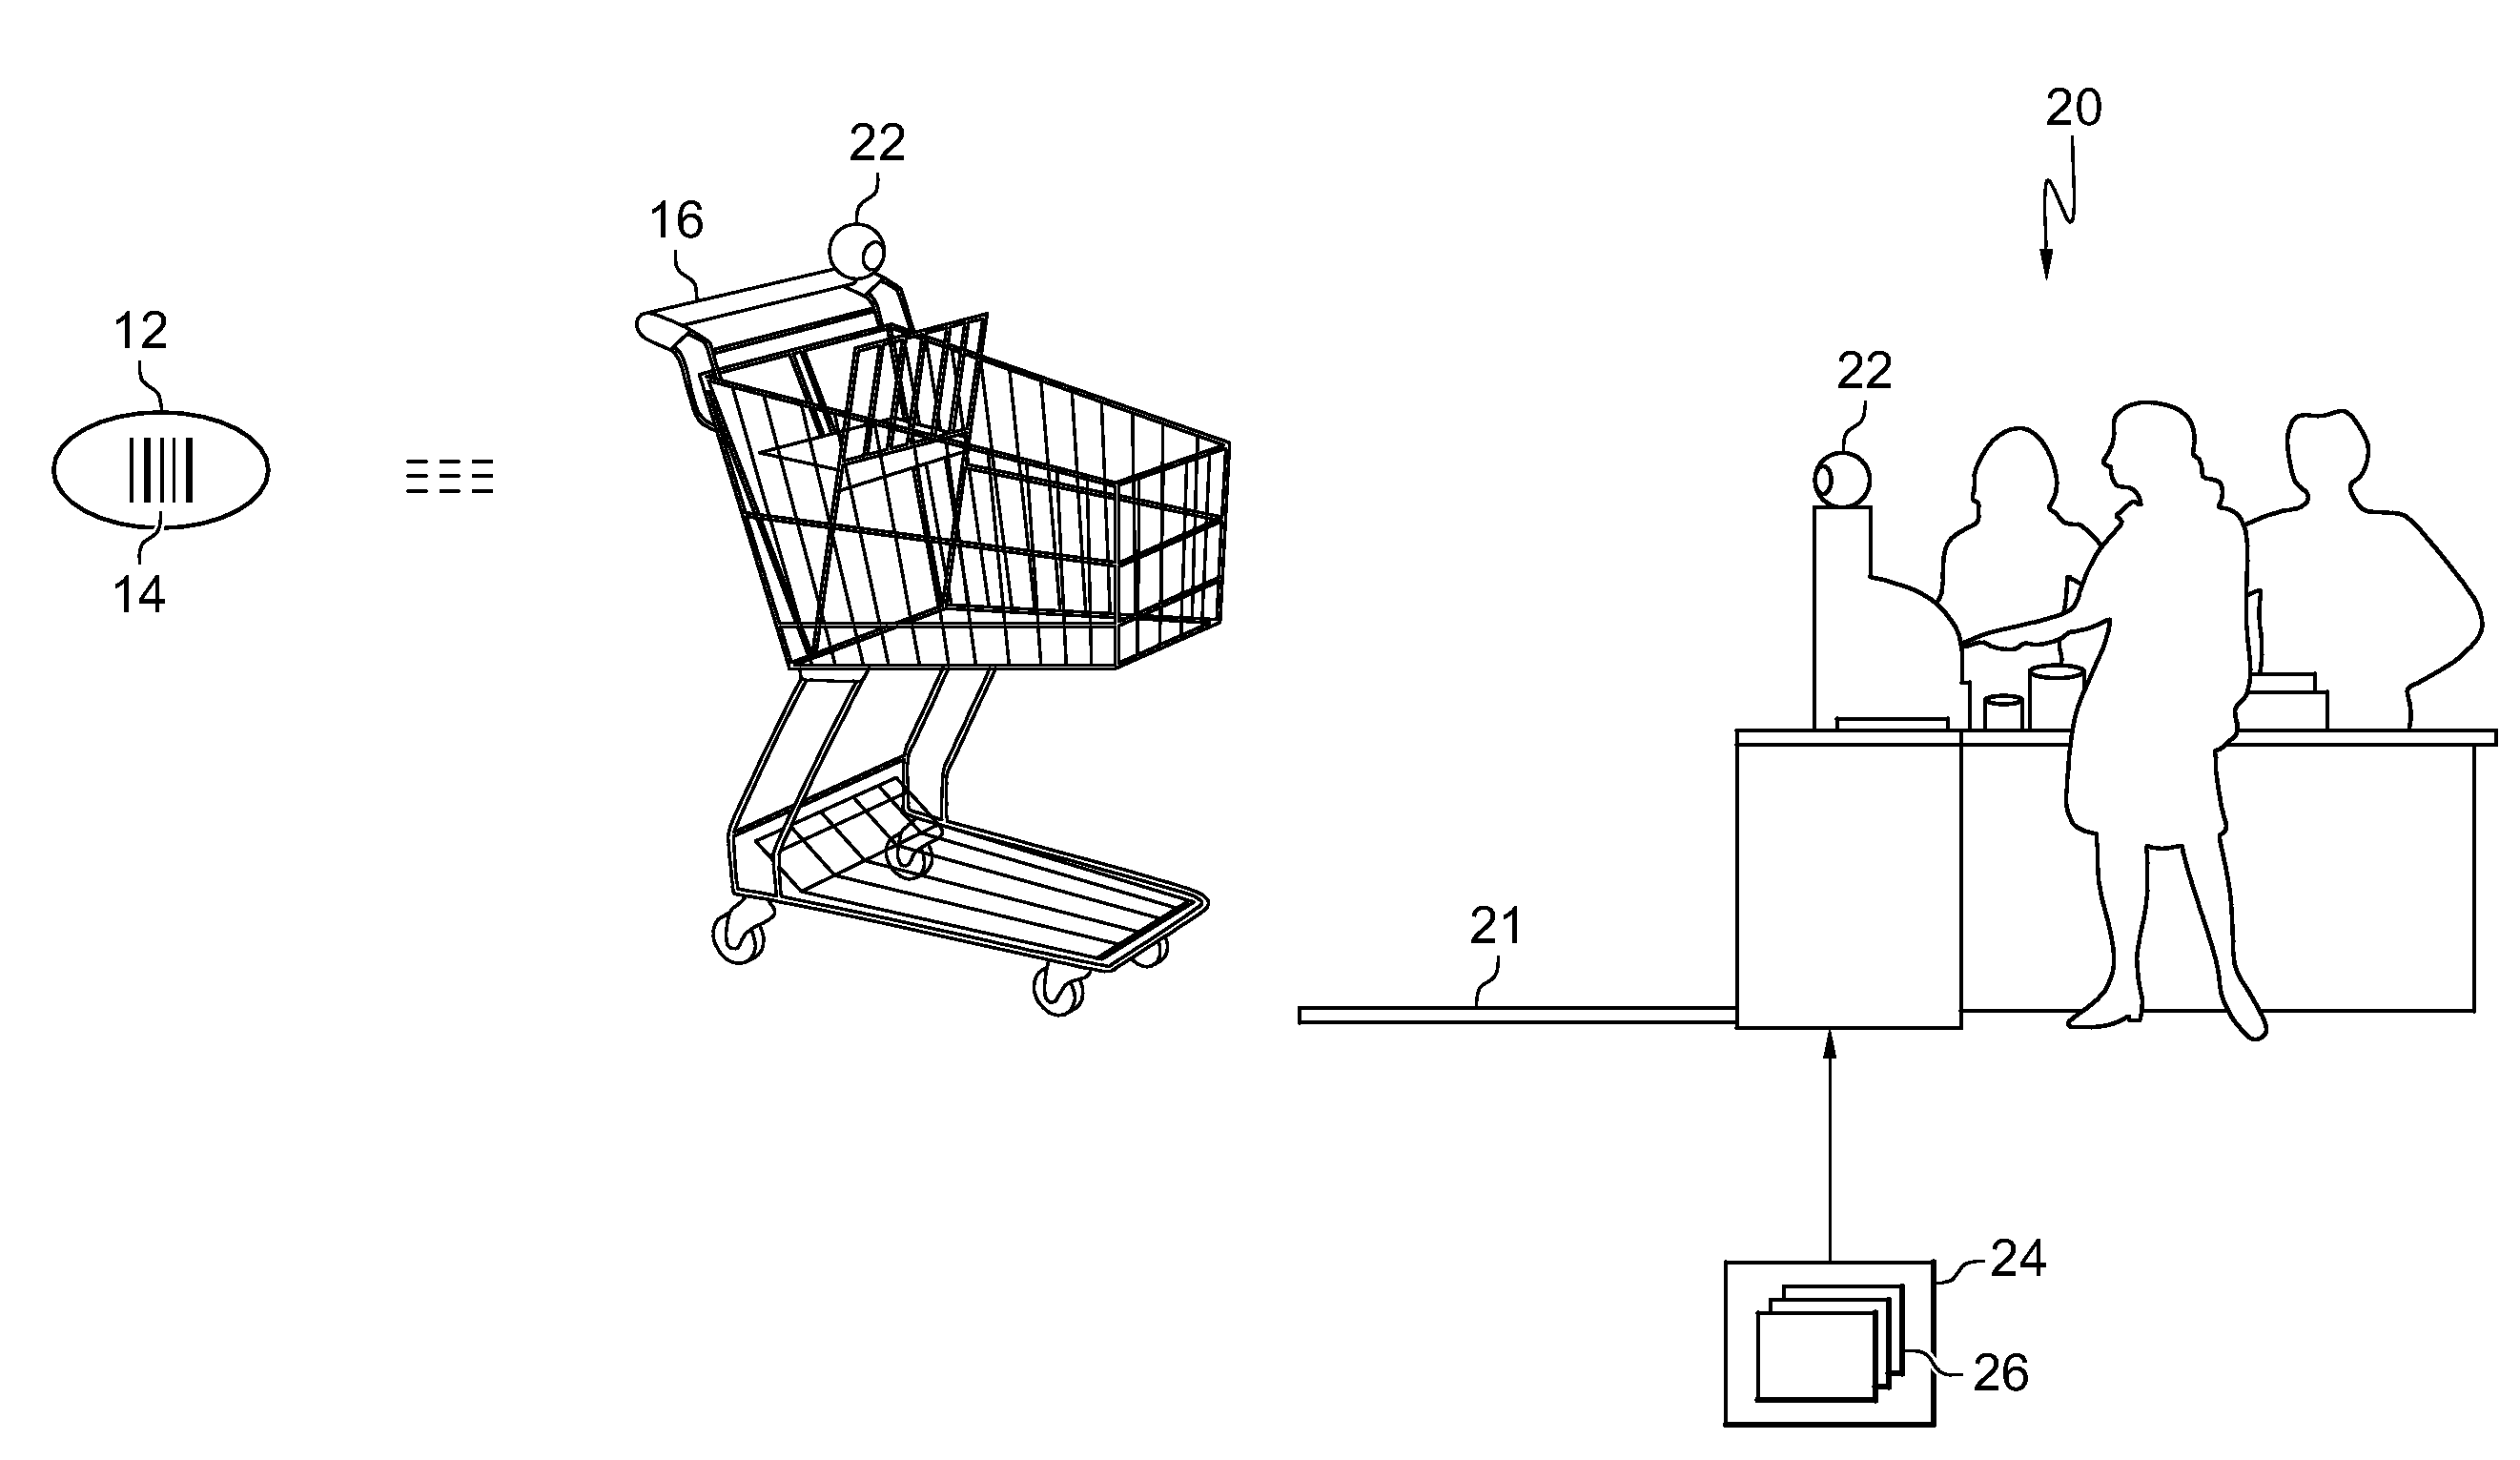 Method, system, and program product for determining a state of a shopping receptacle